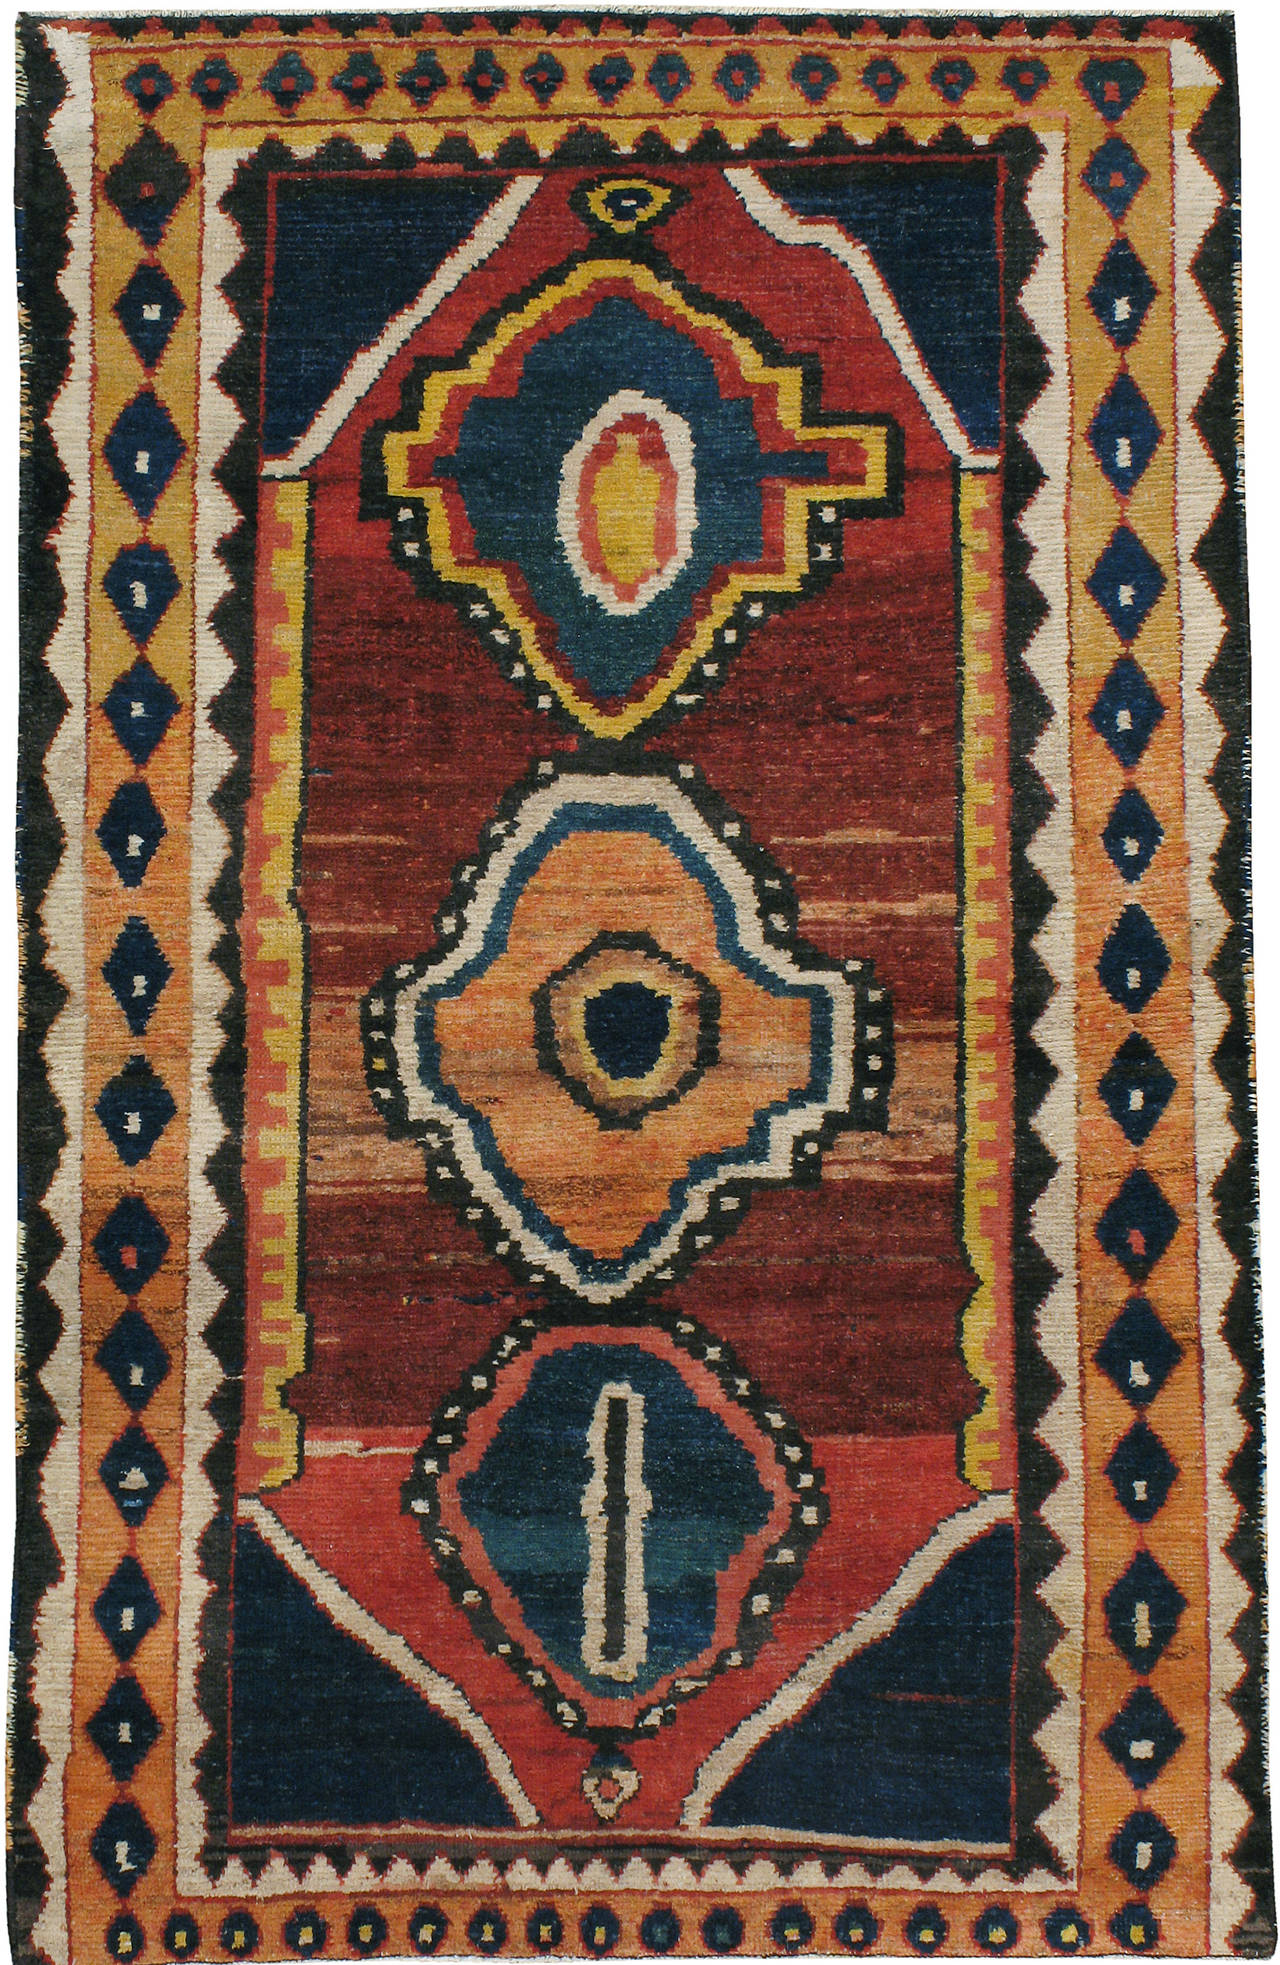 An early 20th century Persian Gabbeh carpet. A cheerful Gabbeh, woven by the nomads in the southwestern region of Persia.